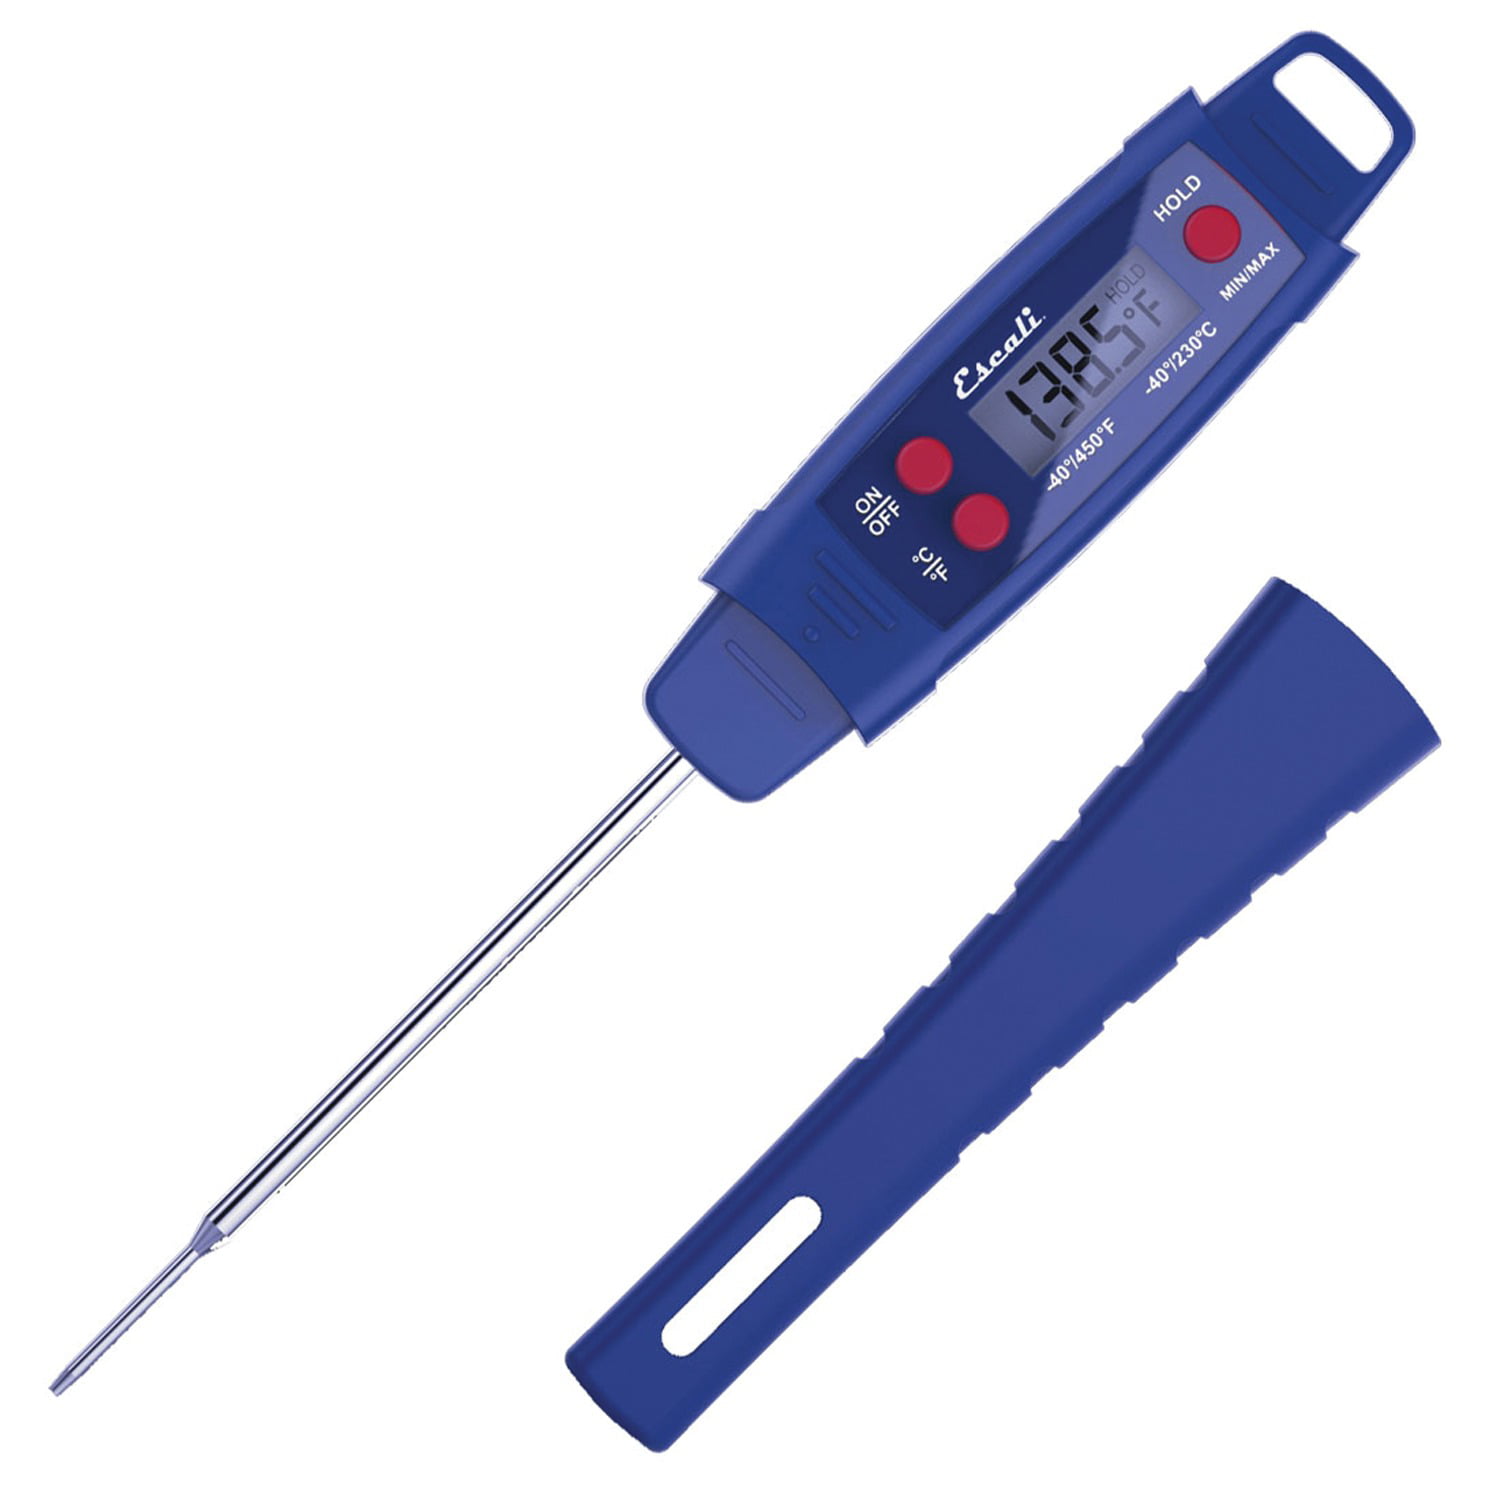 Splash Proof Meat Electric Thermometer –